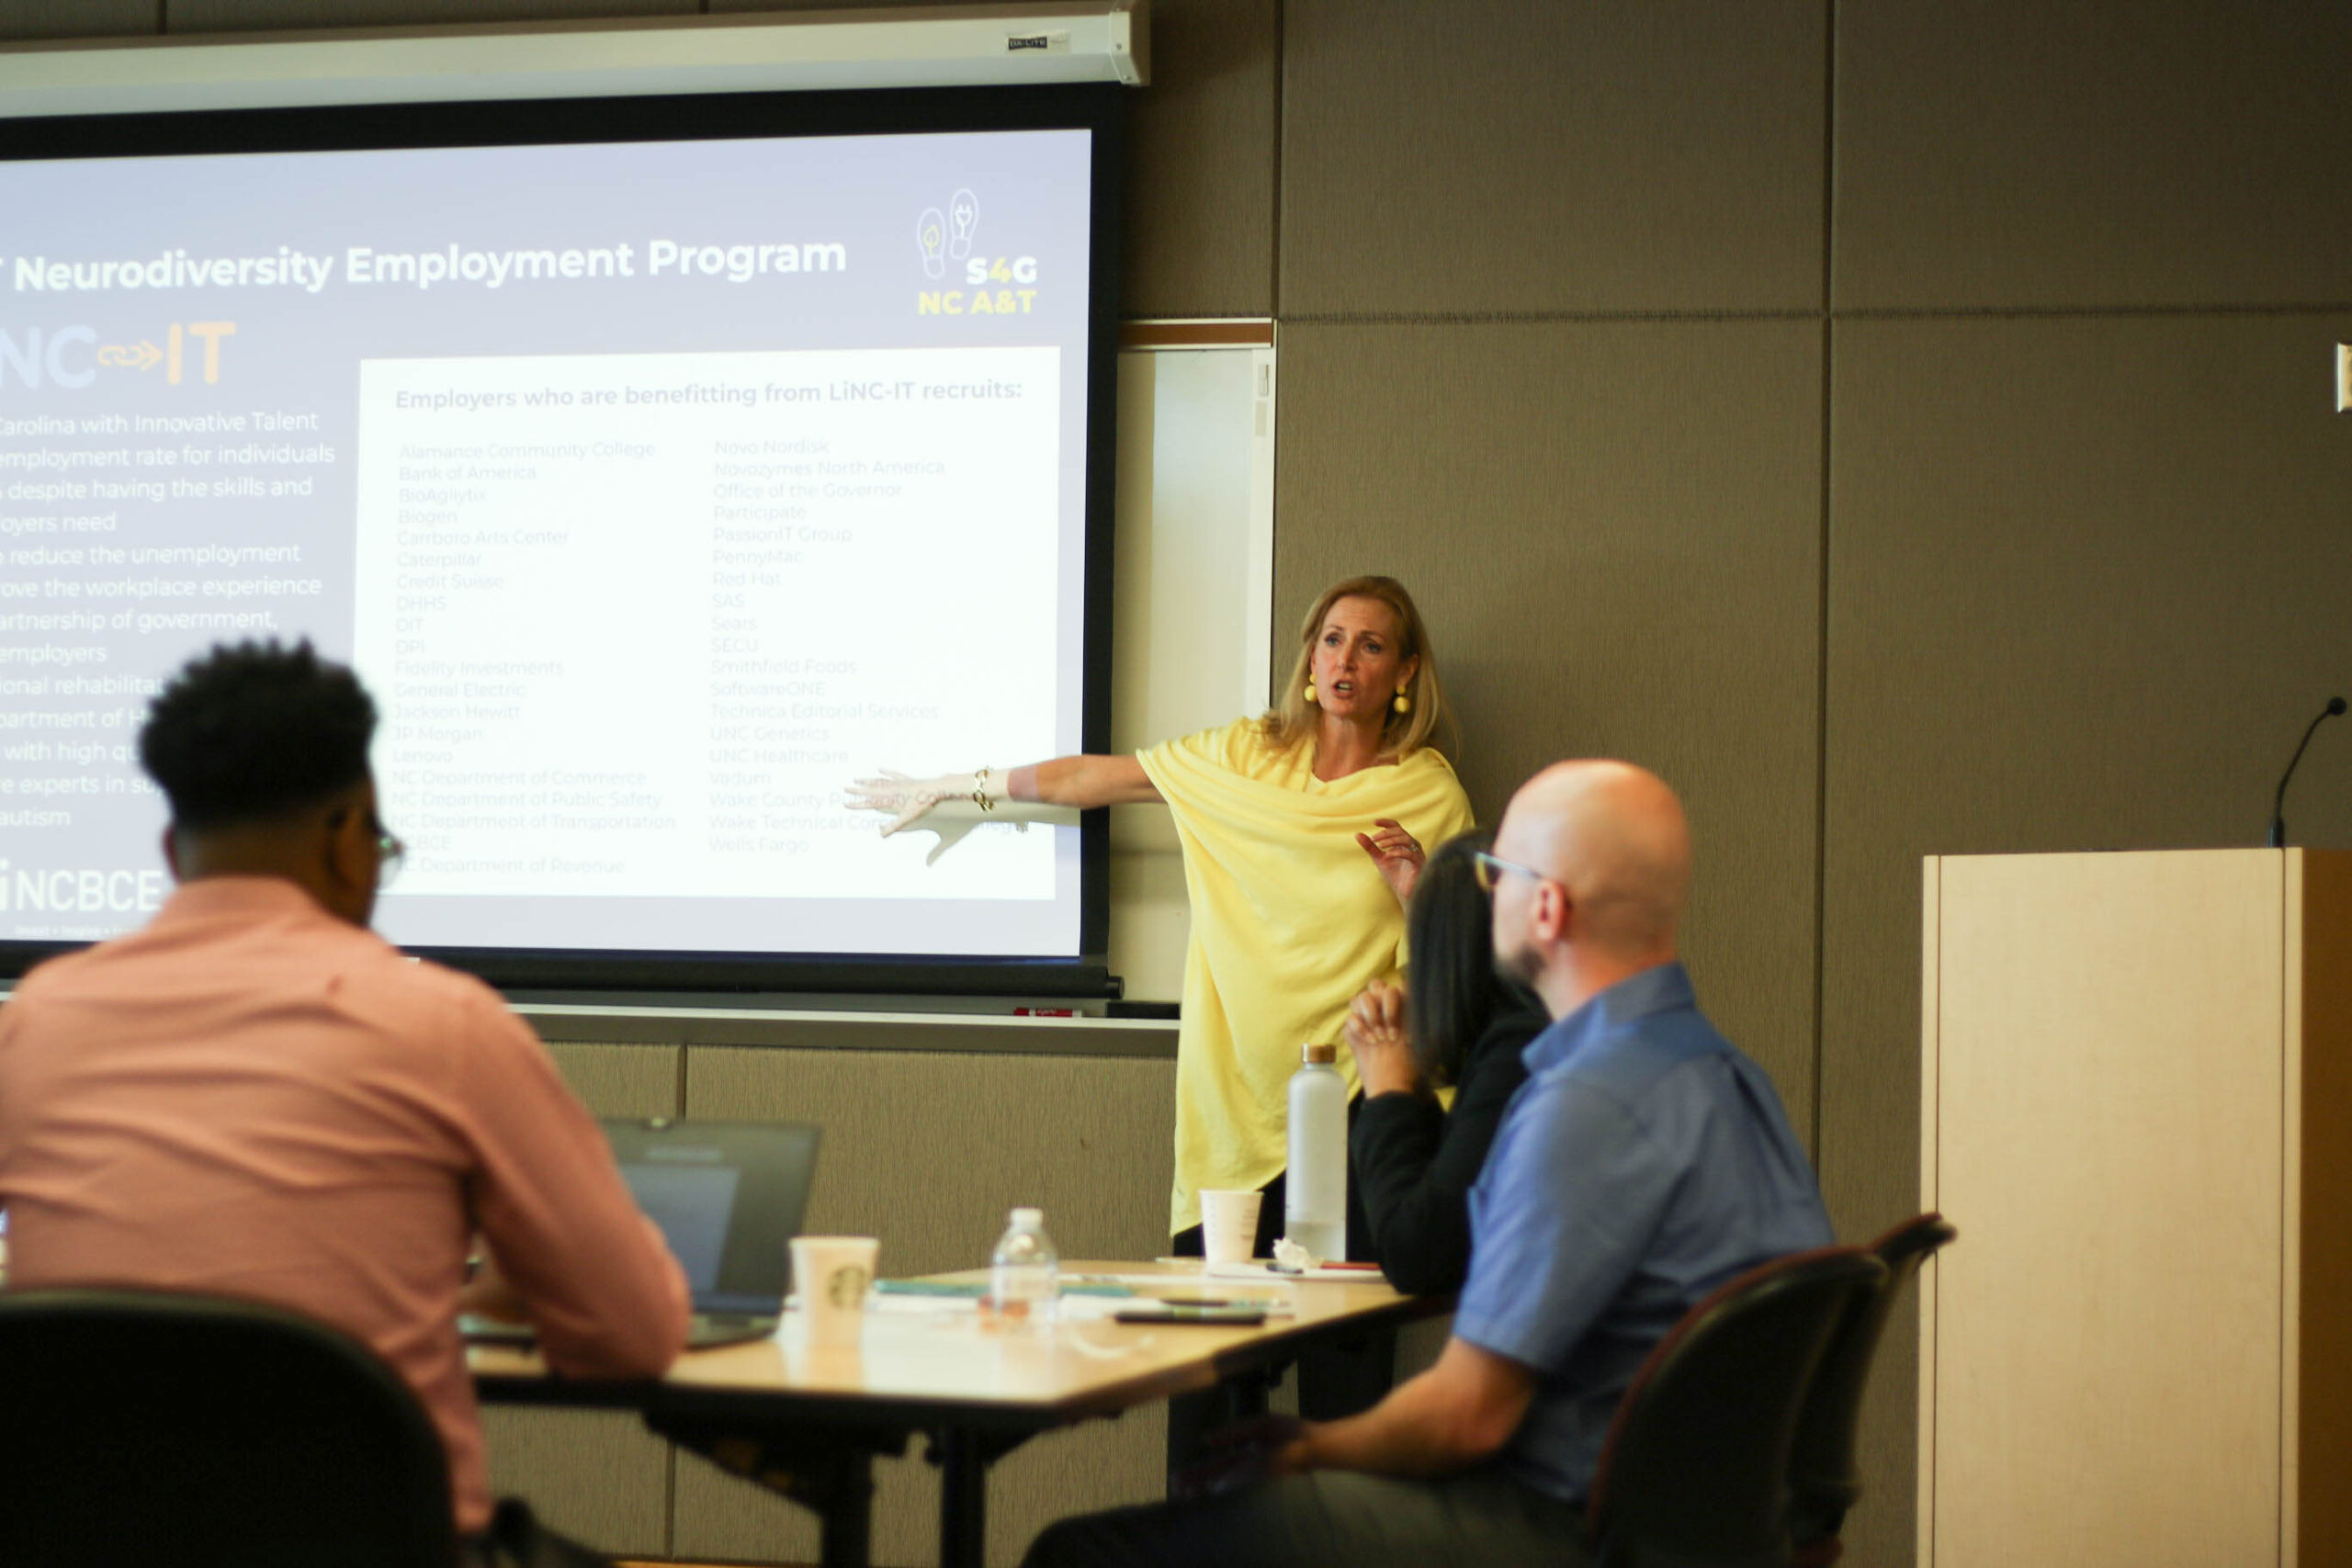 A woman in a yellow outfit is shown at the front of a room presenting on a neurodiversity employment program. Two people are shown at a table listening to her. One is typing on a computer.